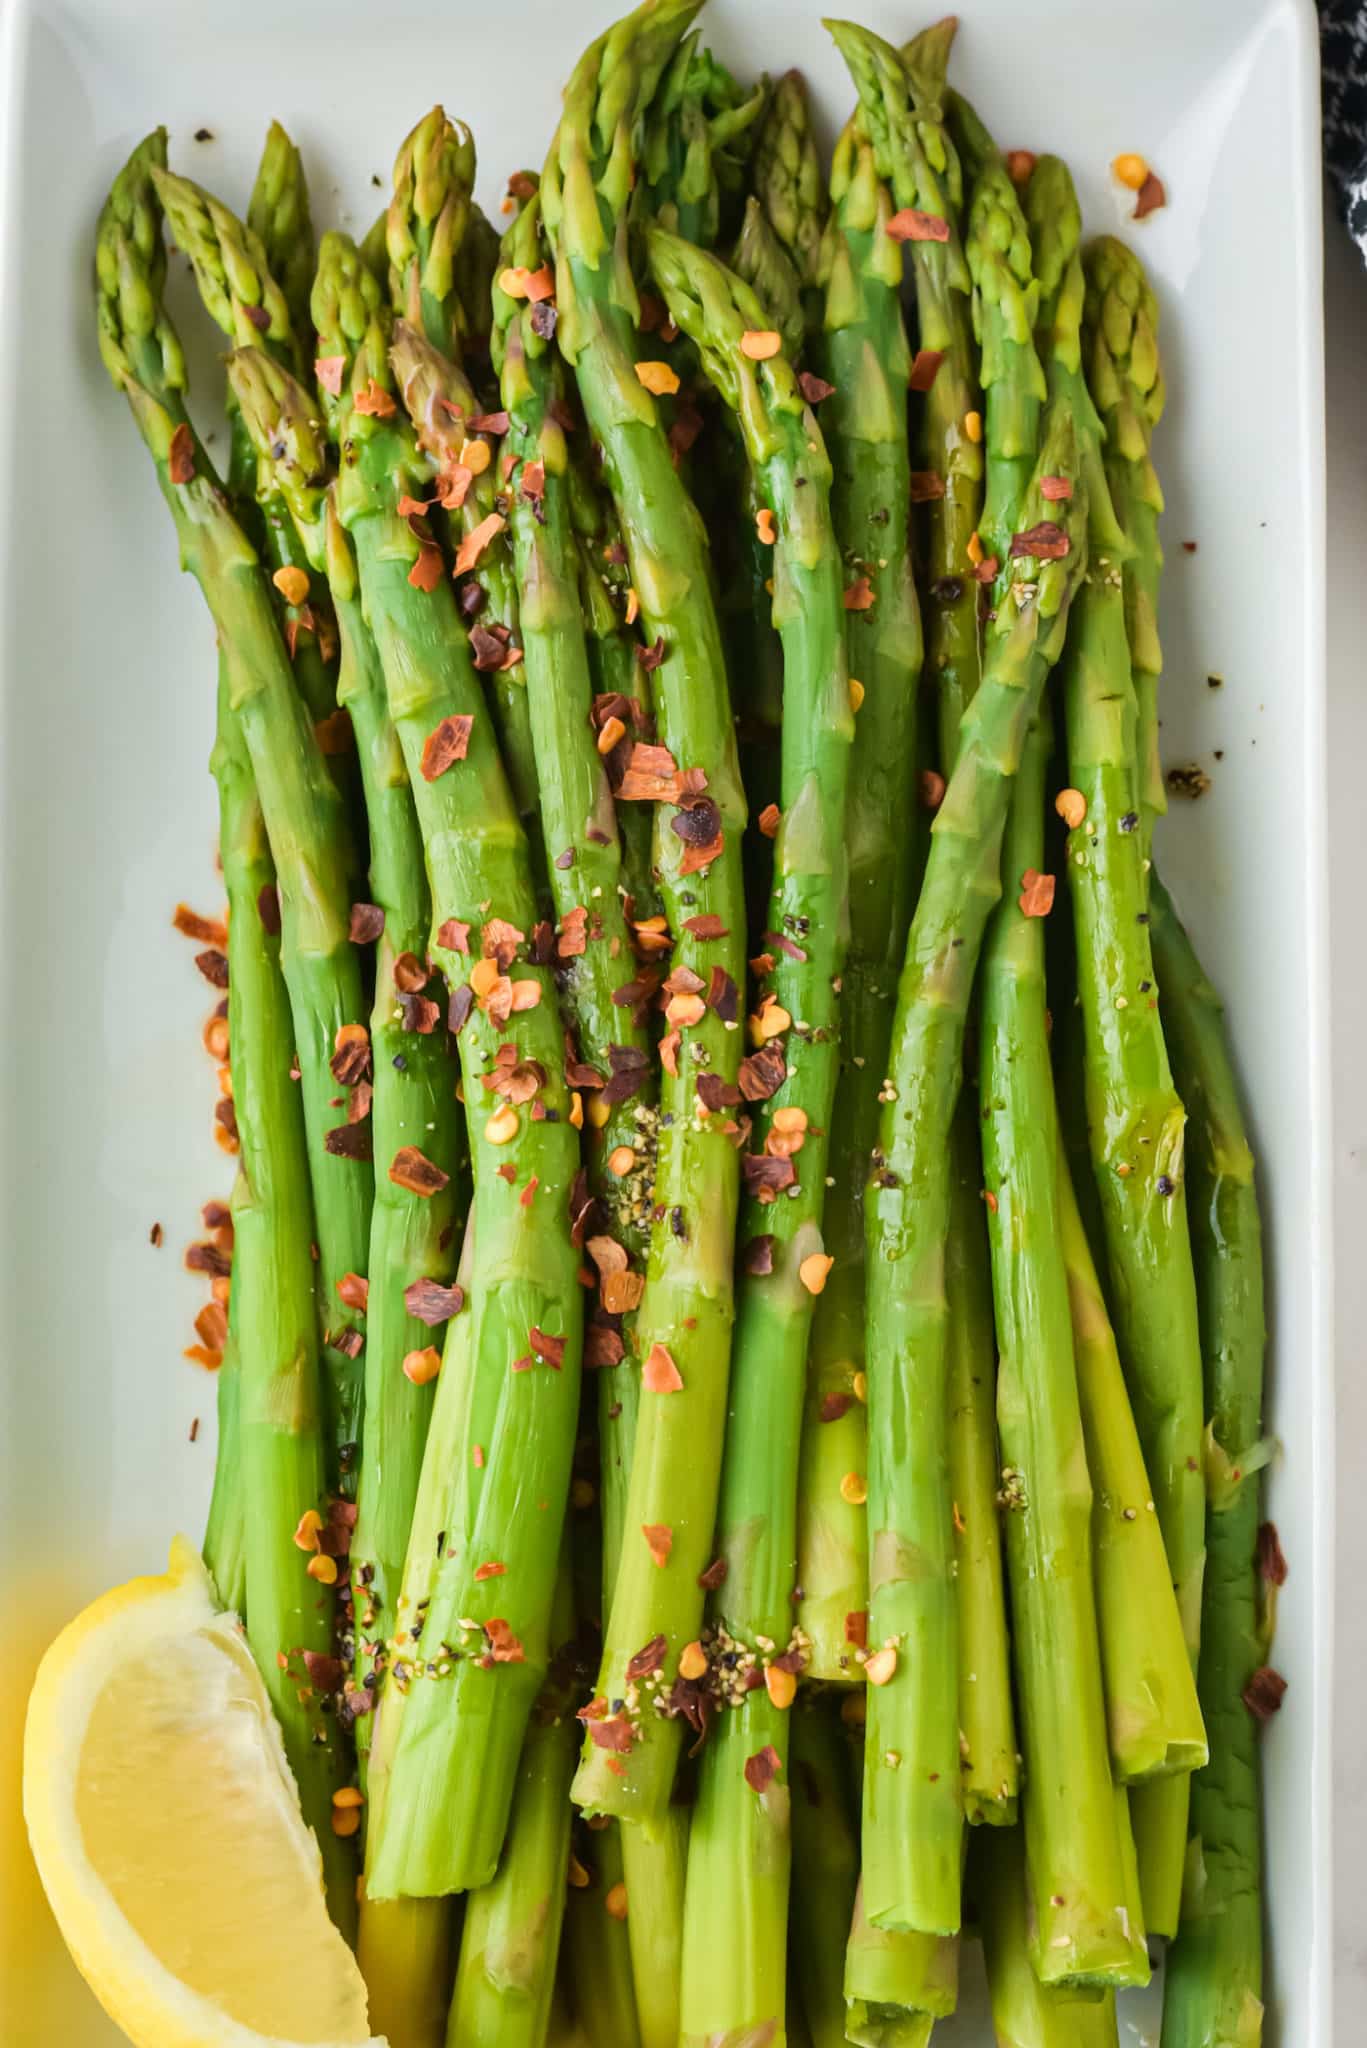 Close up of red chili flakes on cooked asparagus spears.